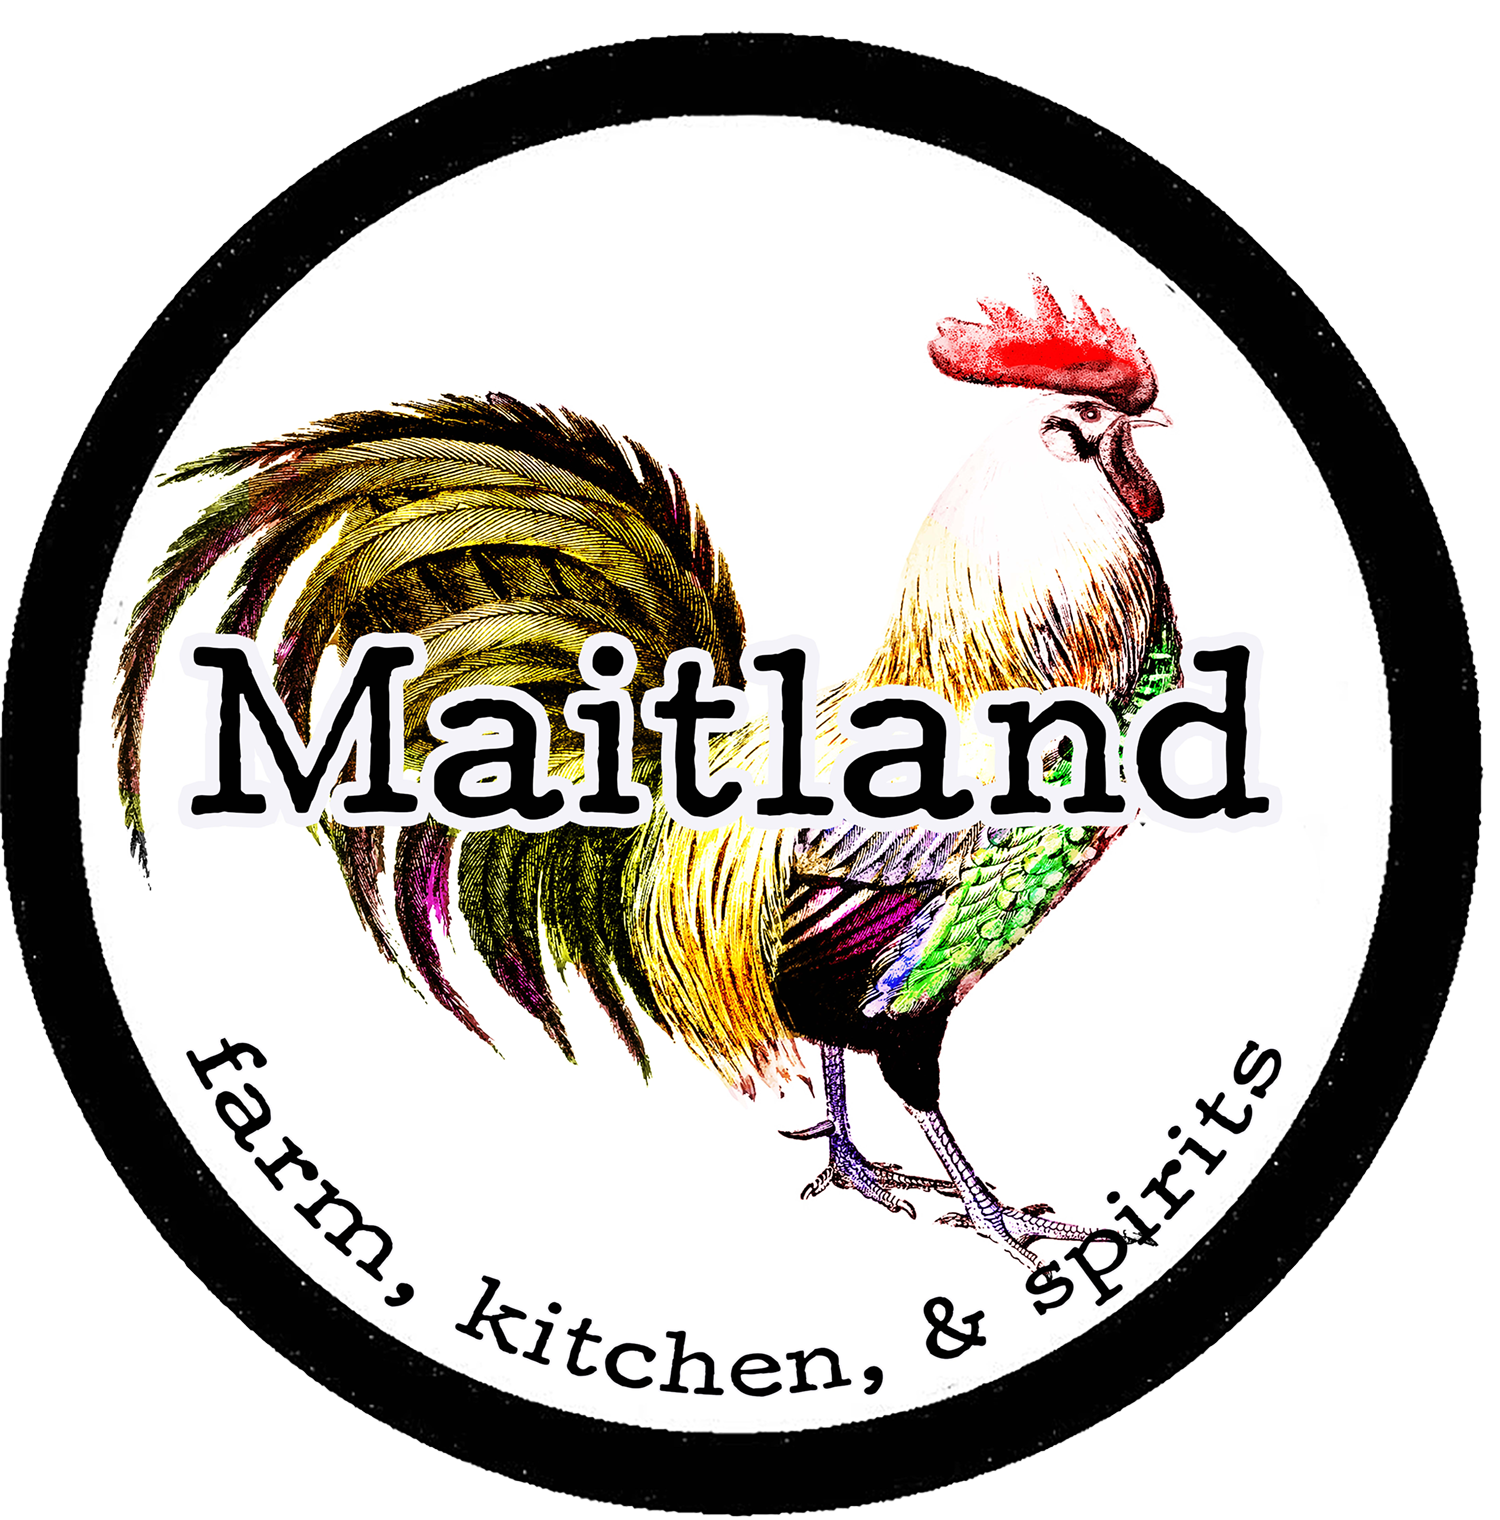 As an expert in SEO marketing, you'd be thrilled by this distinct brand emblem. It's a vibrant representation of a rooster, paired with the name 'Maitland'. This term comes together with 'farm, kitchen, & spirits', all enclosed within a sleek circular black backdrop.